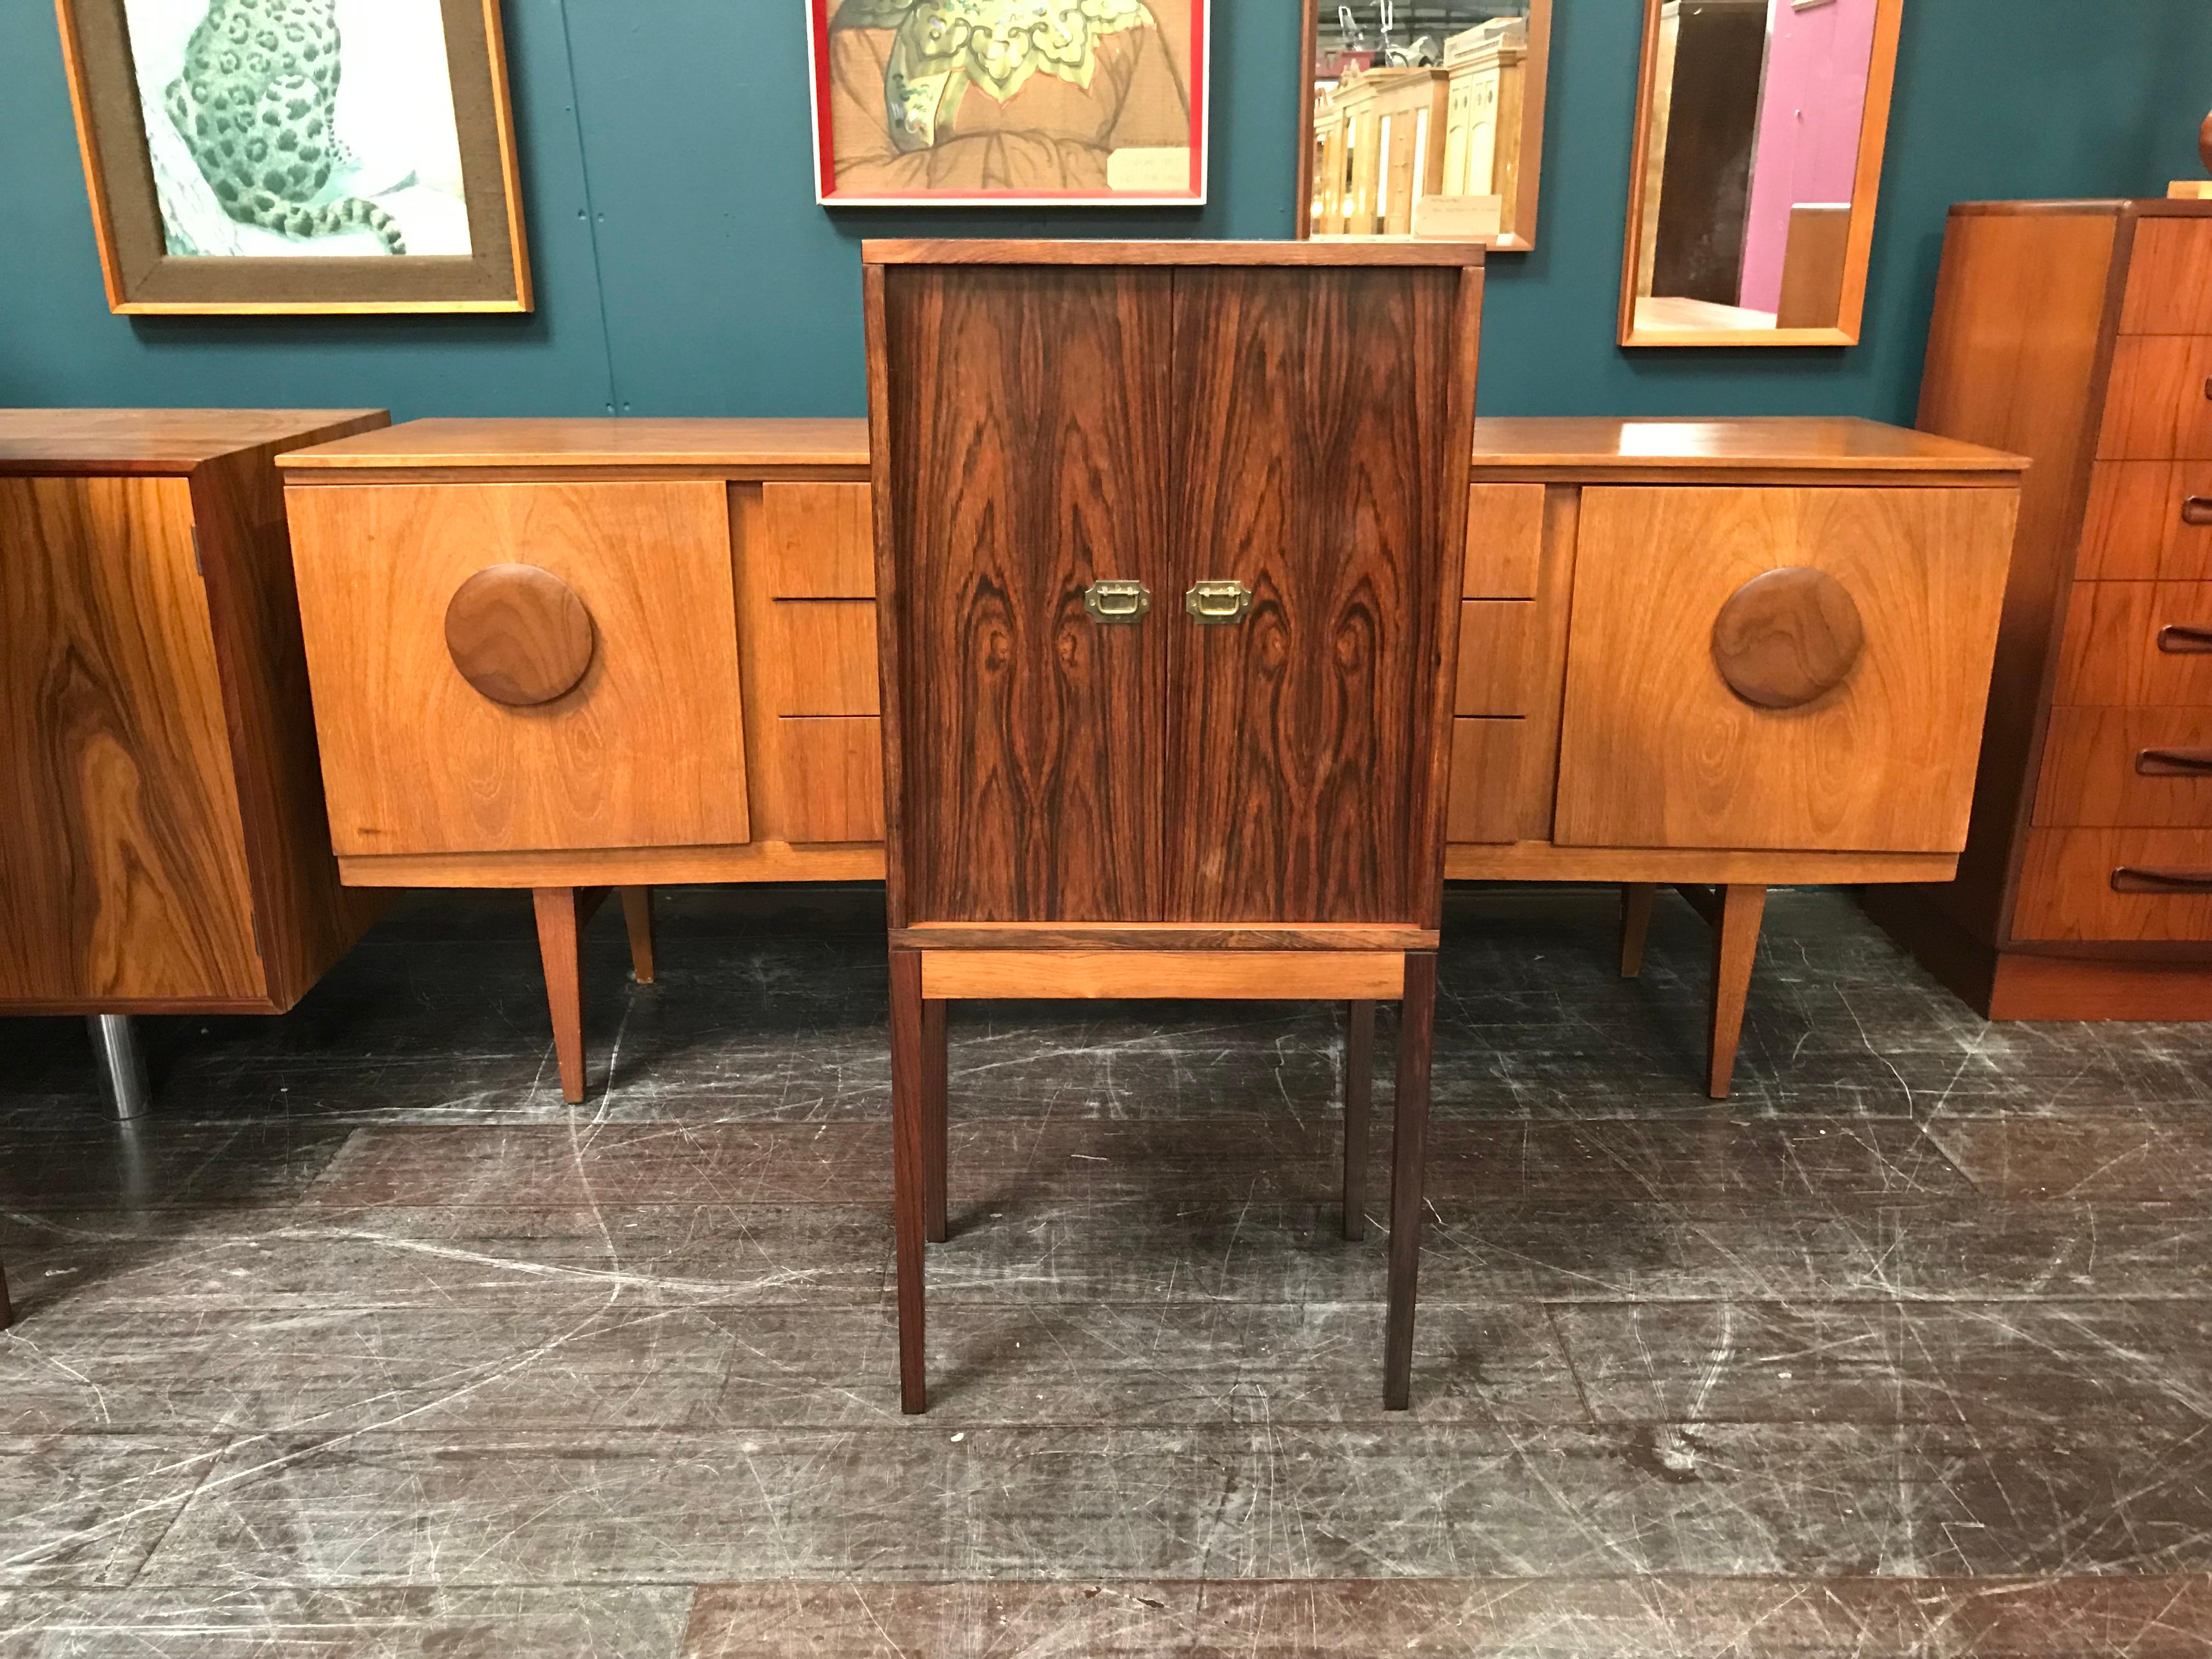 A superb and very finely made vintage cabinet, in rosewood, by the Danish designer Henning Korch and manufactured by Silkeborg Mobelfabrik in the 1960s. This Classic piece of midcentury Scandinavian furniture has some of the most impressive rosewood